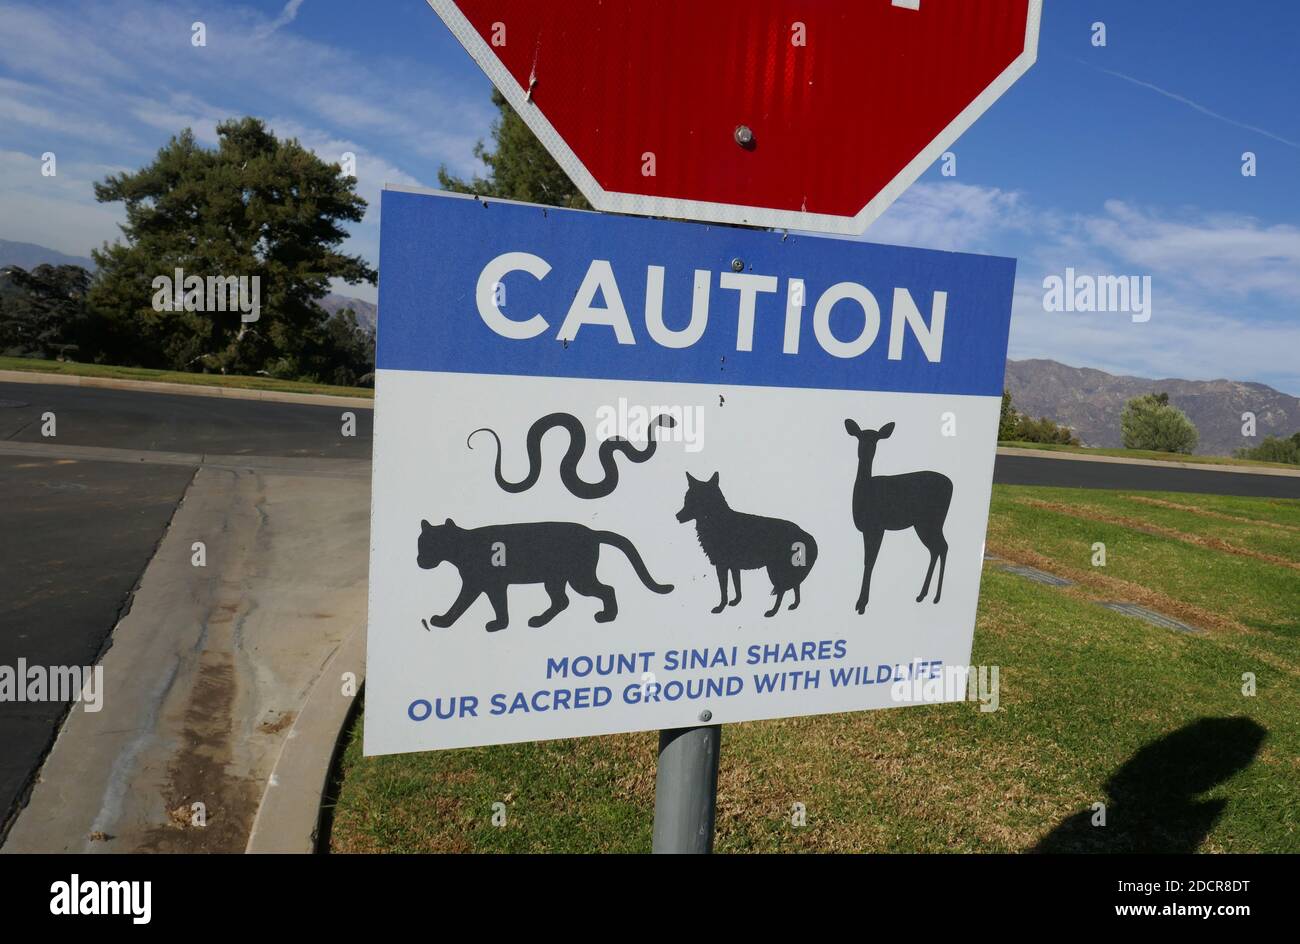 Los Angeles, California, USA 17th November 2020 A general view of atmosphere Caution Wildlife Sign at Mount Sinai Cemetery Hollywood Hills on November 17, 2020 in Los Angeles, California, USA. Photo by Barry King/Alamy Stock Photo Stock Photo